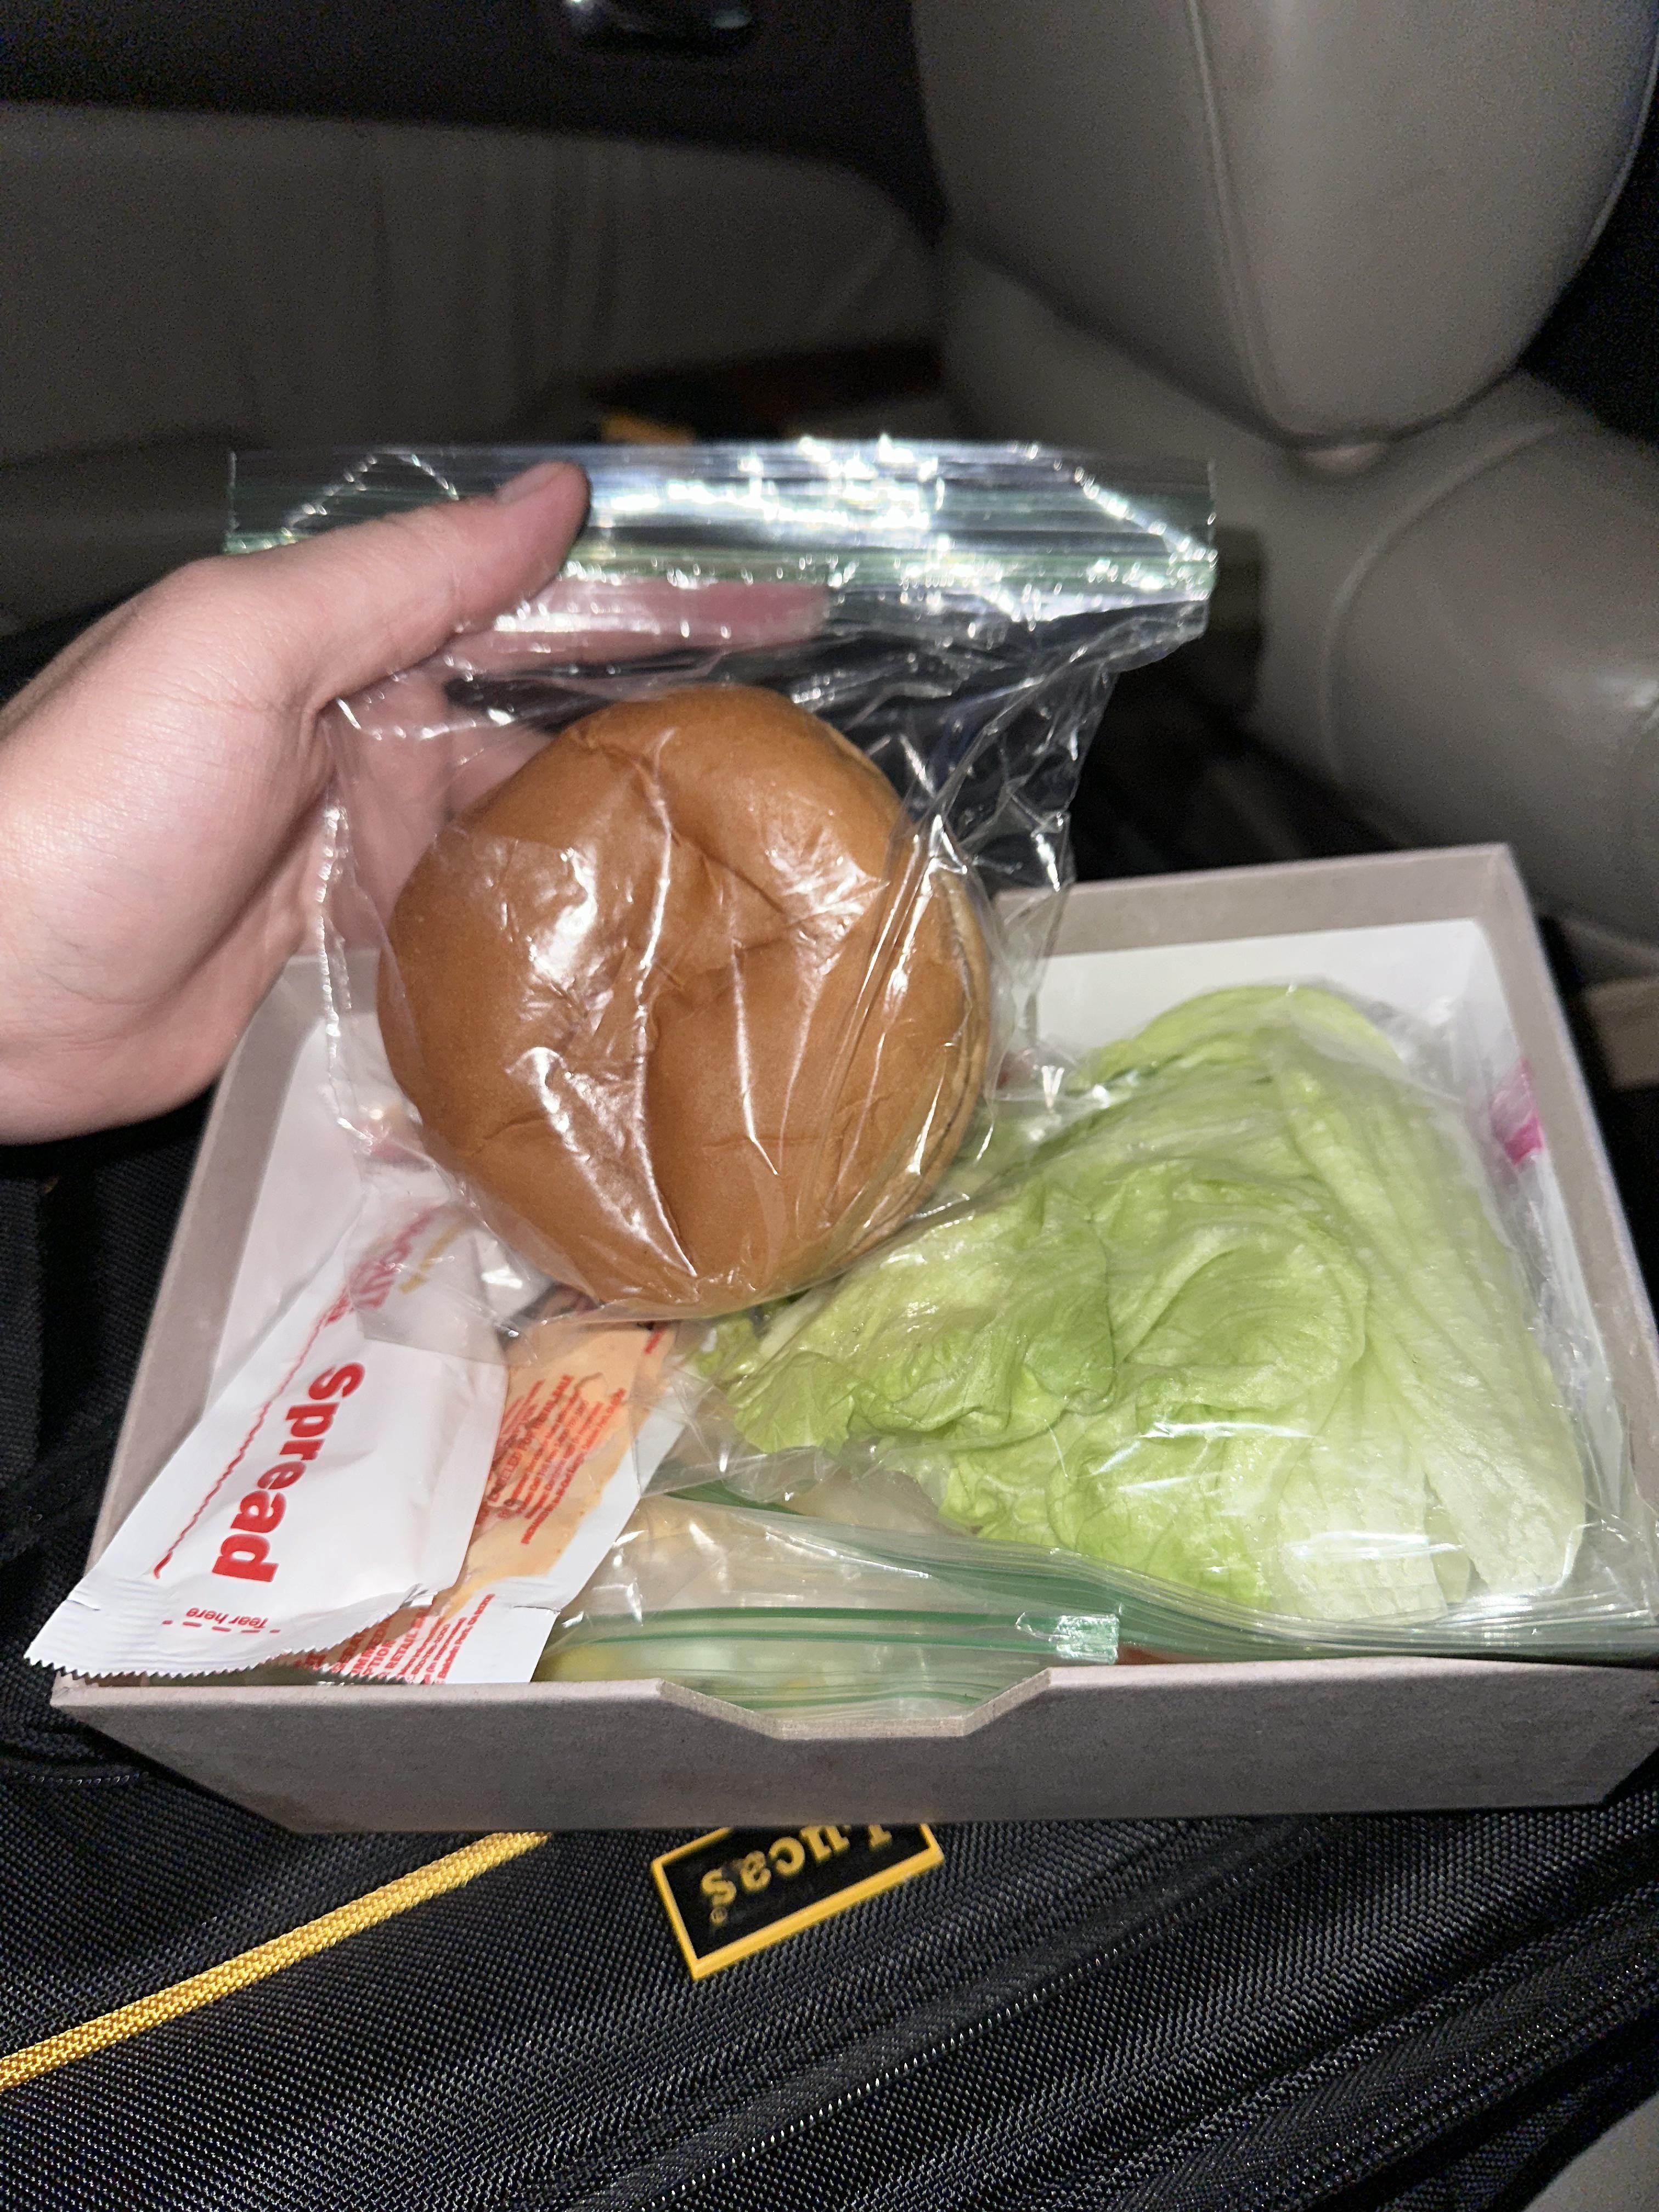 I moved out of California a year ago to the east coast. My mom is visiting and brought a disassembled In N Out burger.